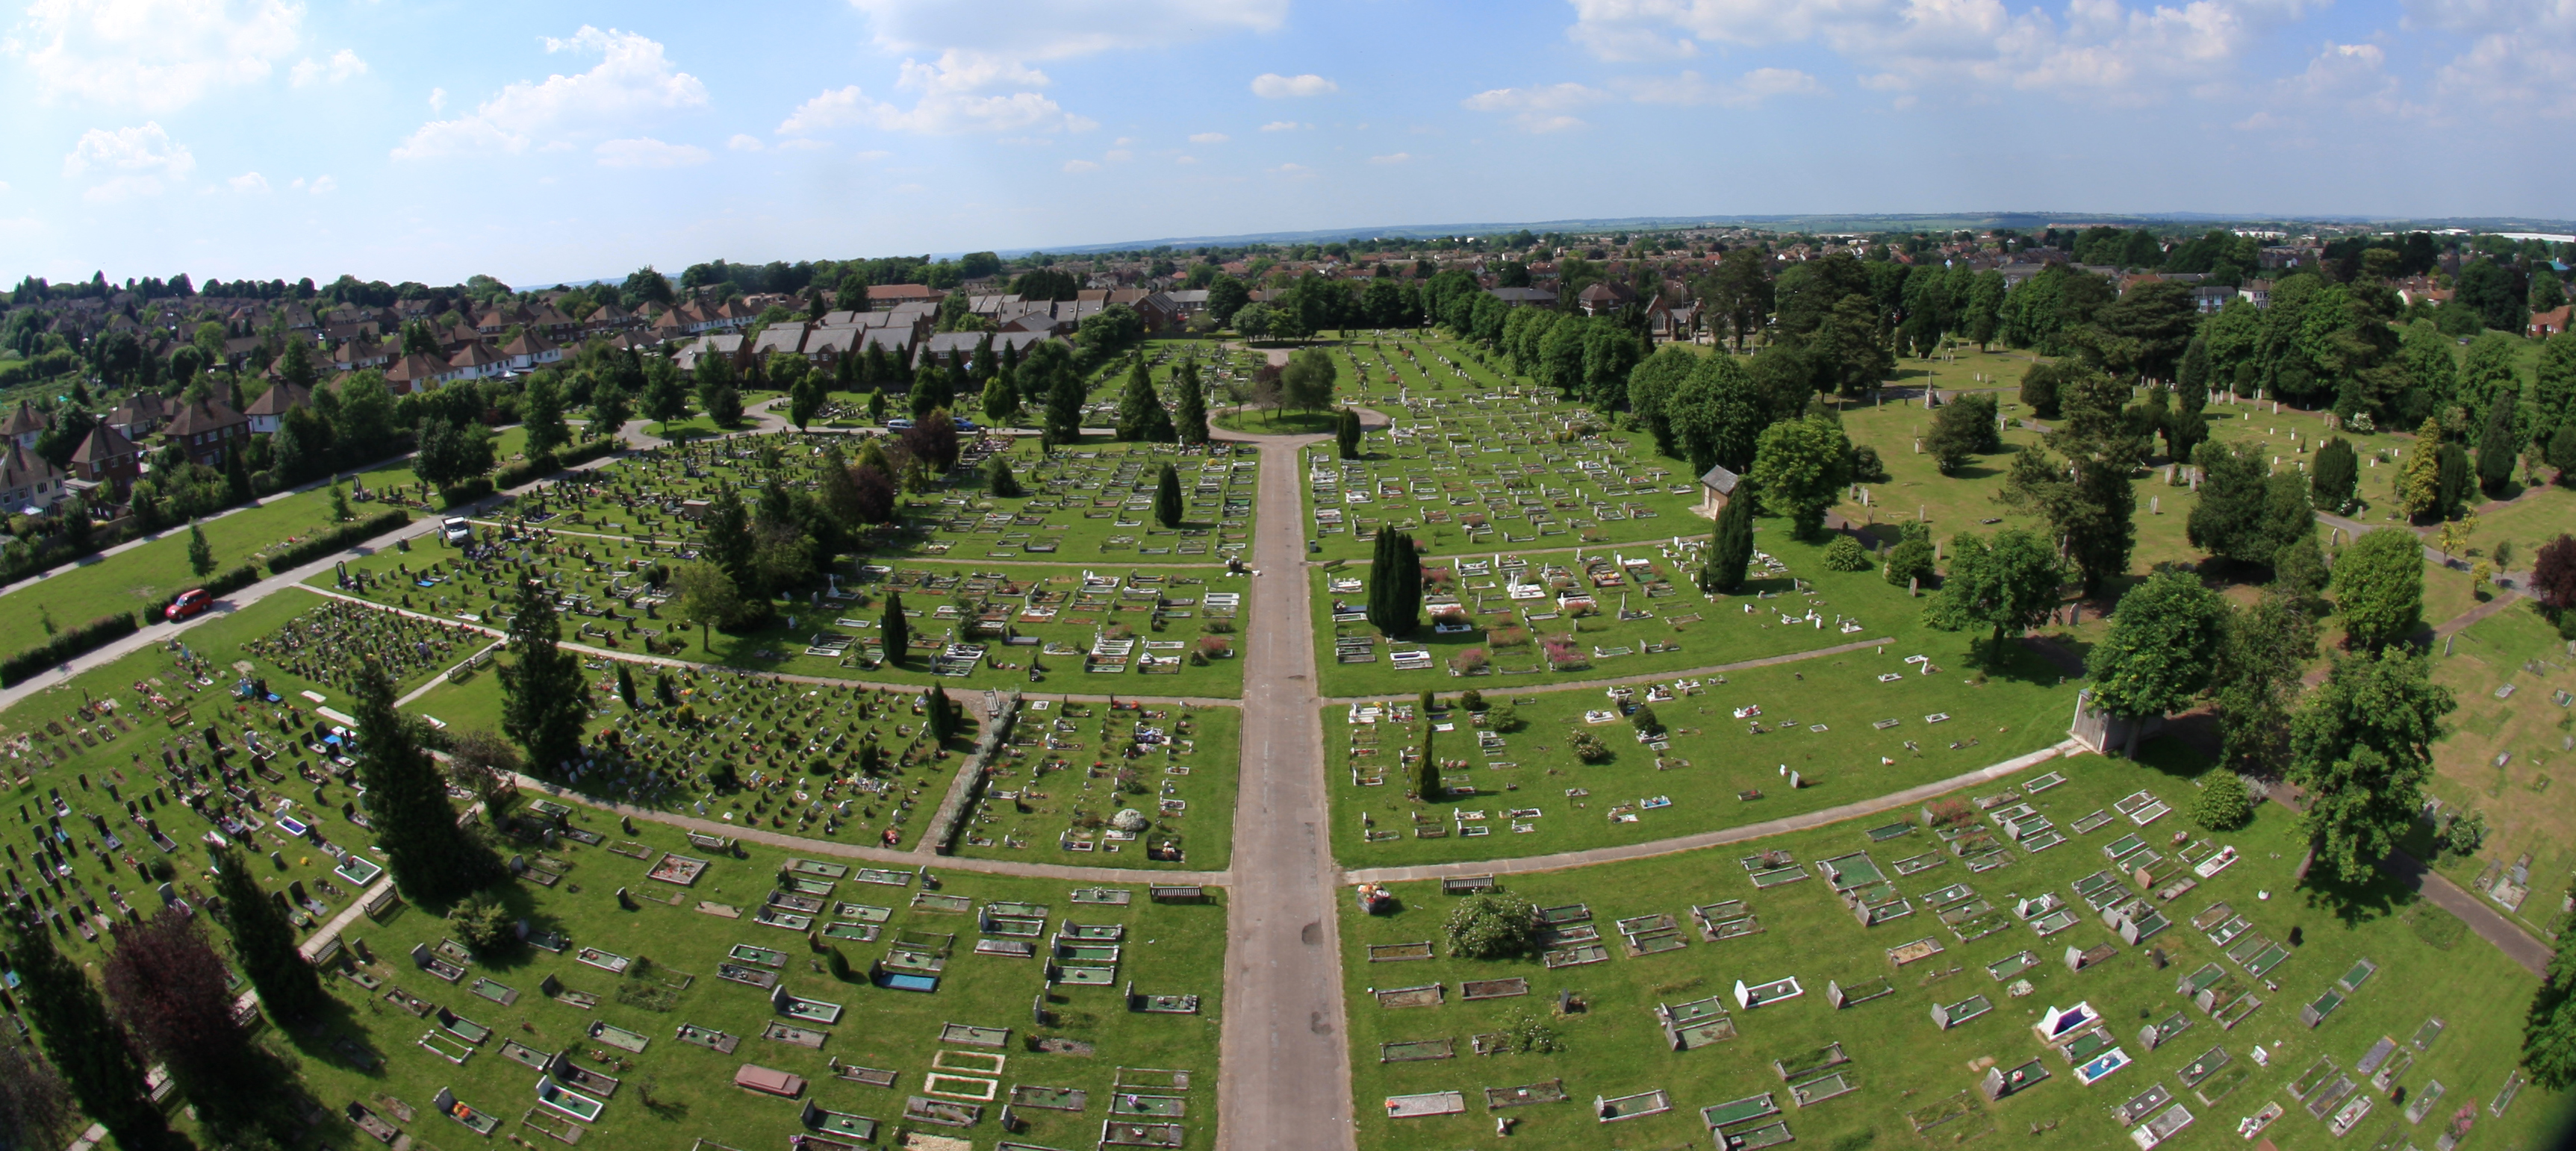 An Aerial Photo of Dunstable Cemetery